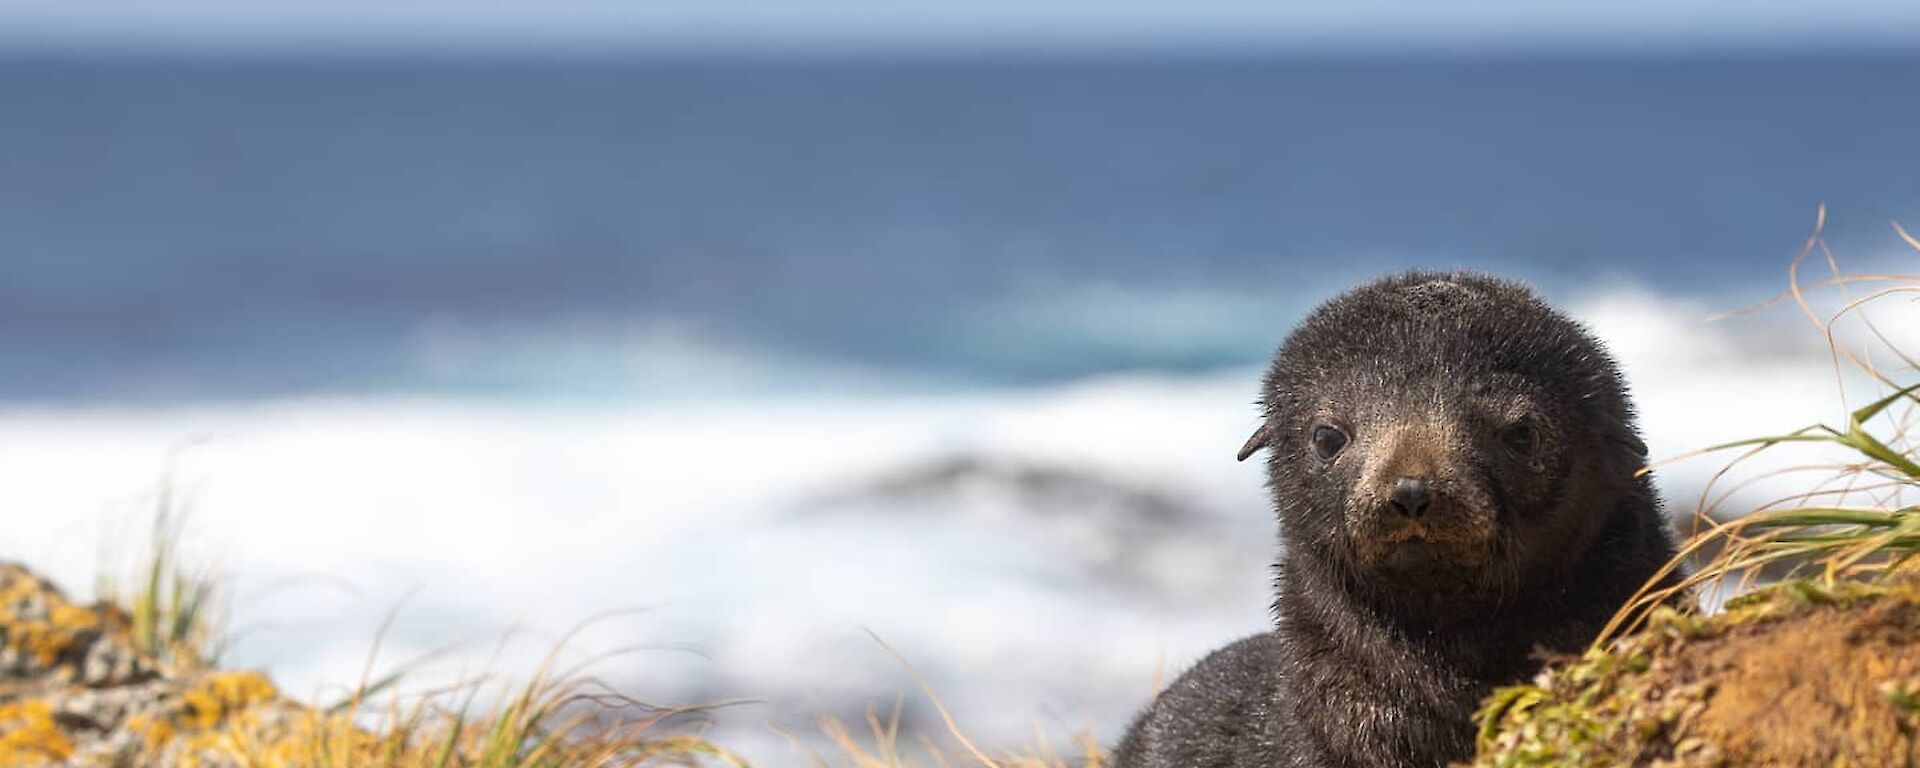 Cute fur seal pup in the grass looking at camera